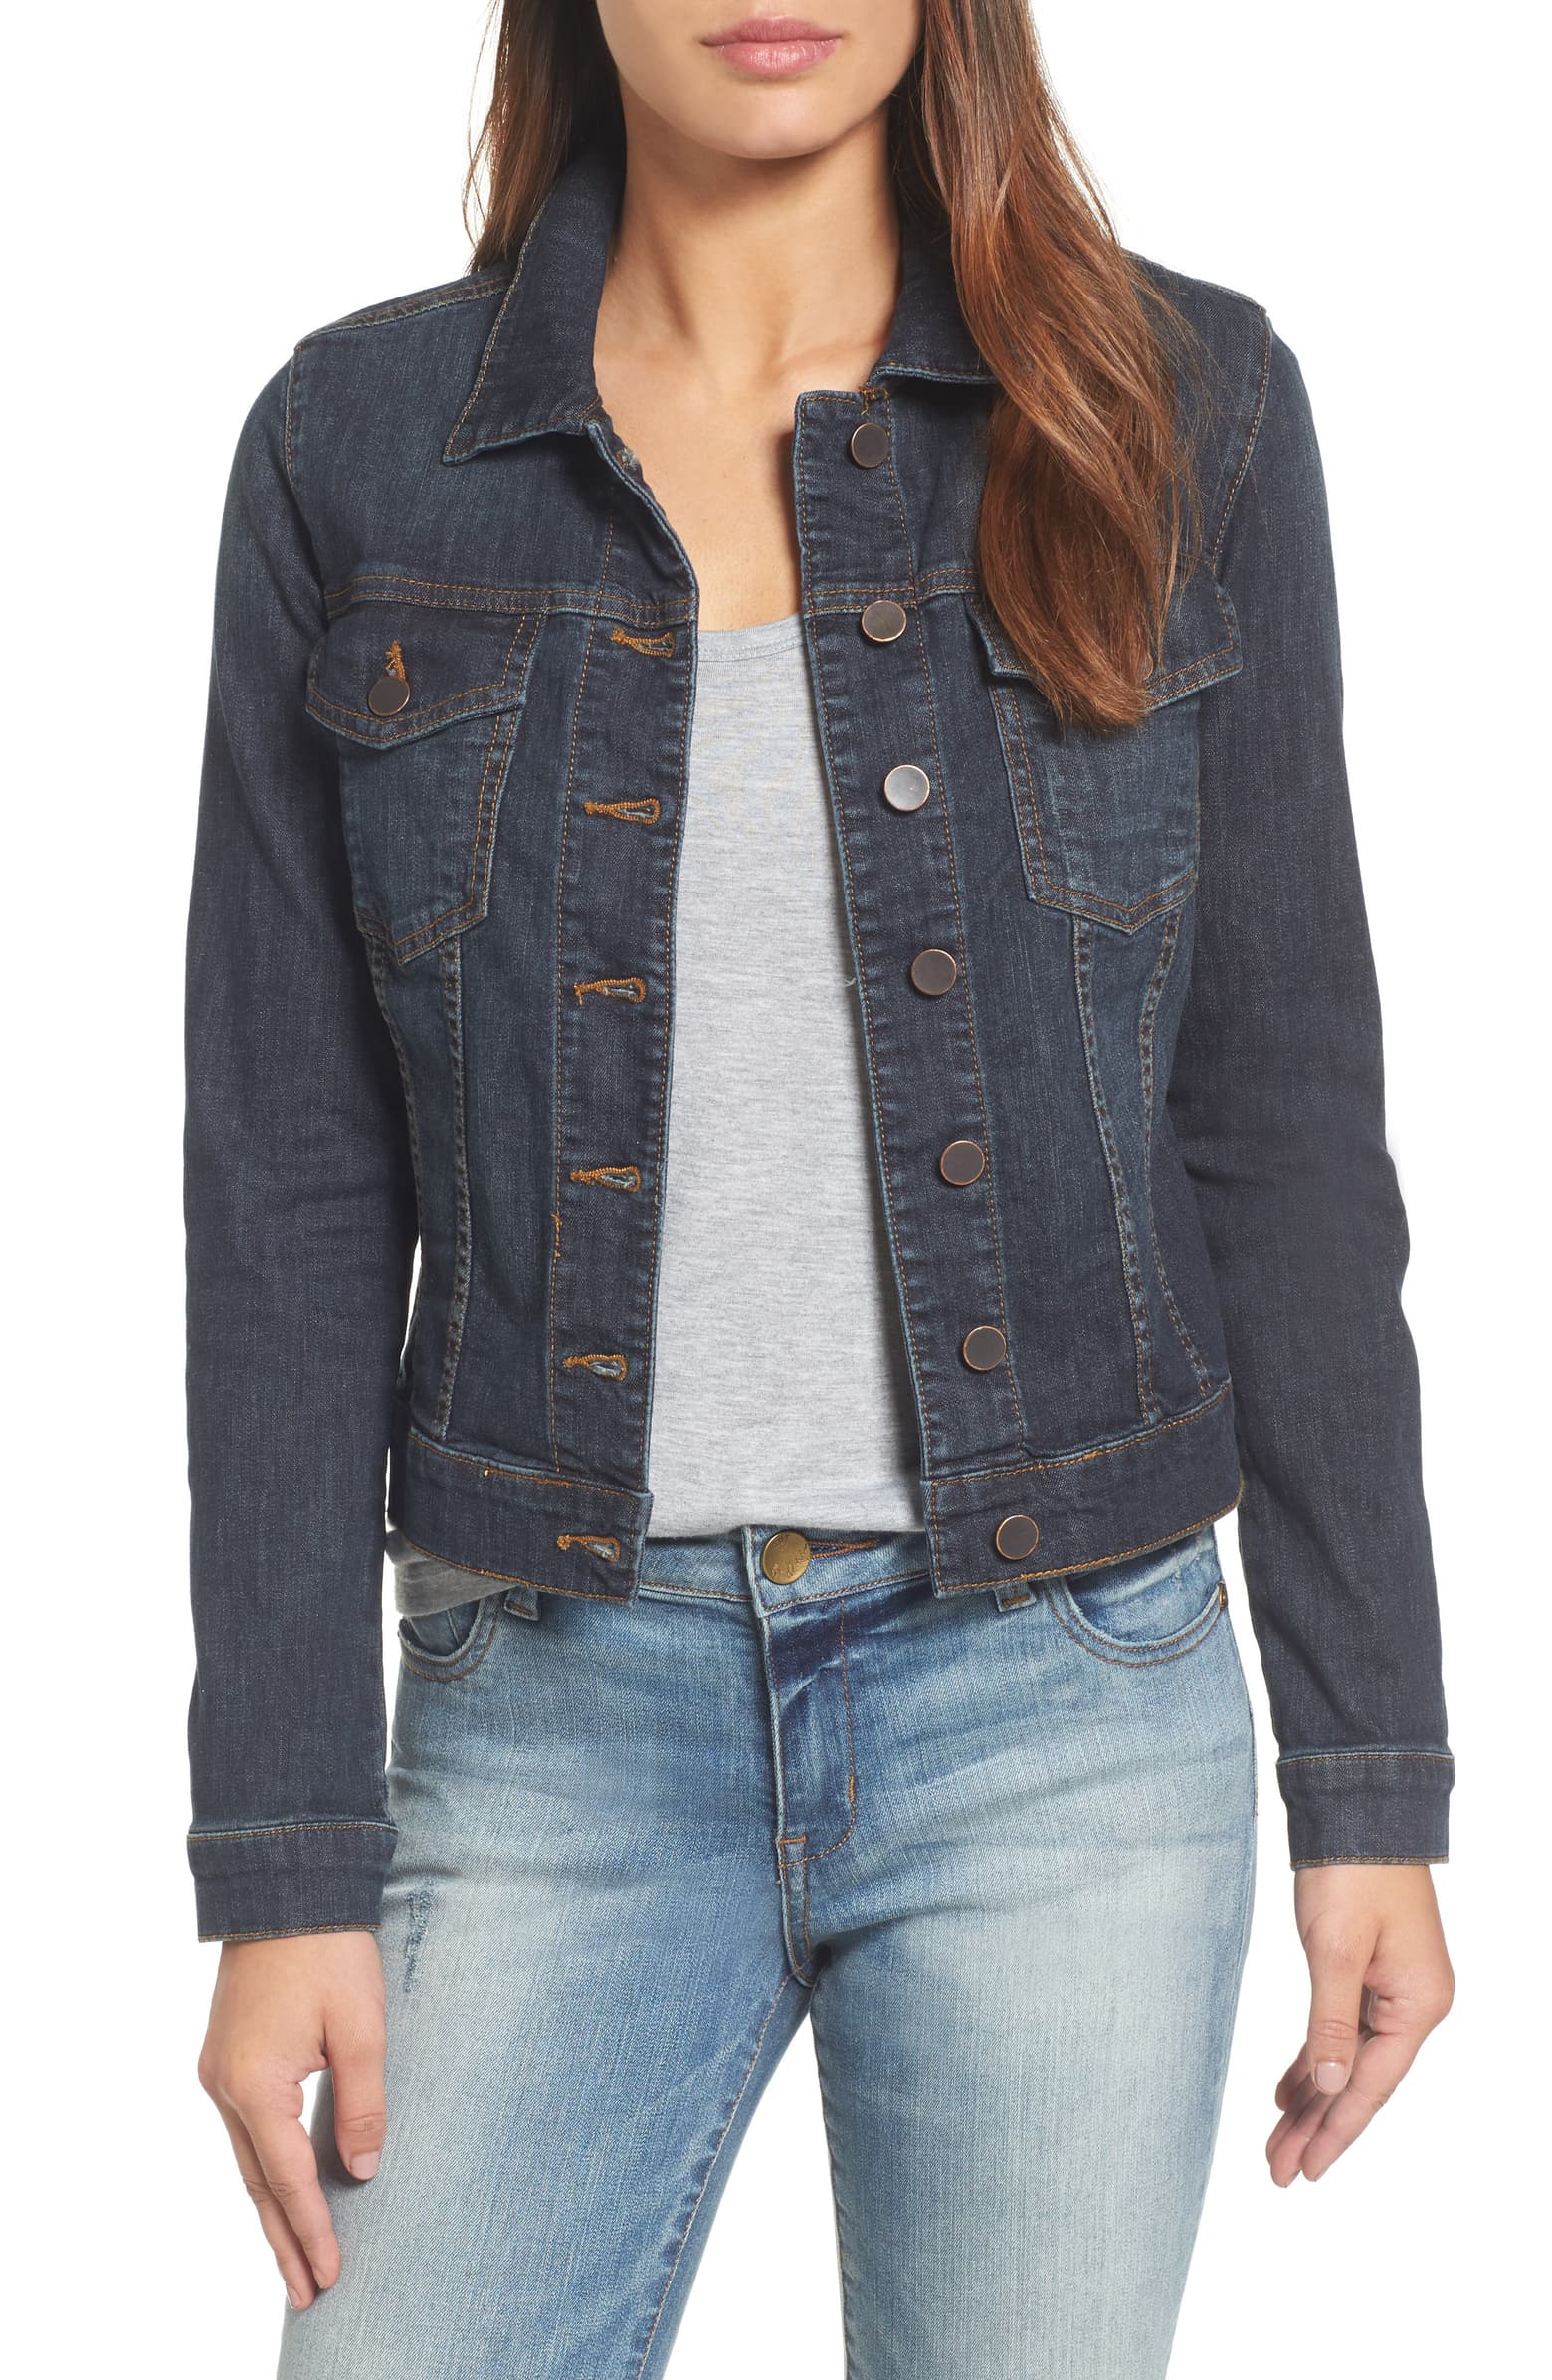 The Perfect Denim Jacket Is On Sale For 50% Off At Nordstrom This ...